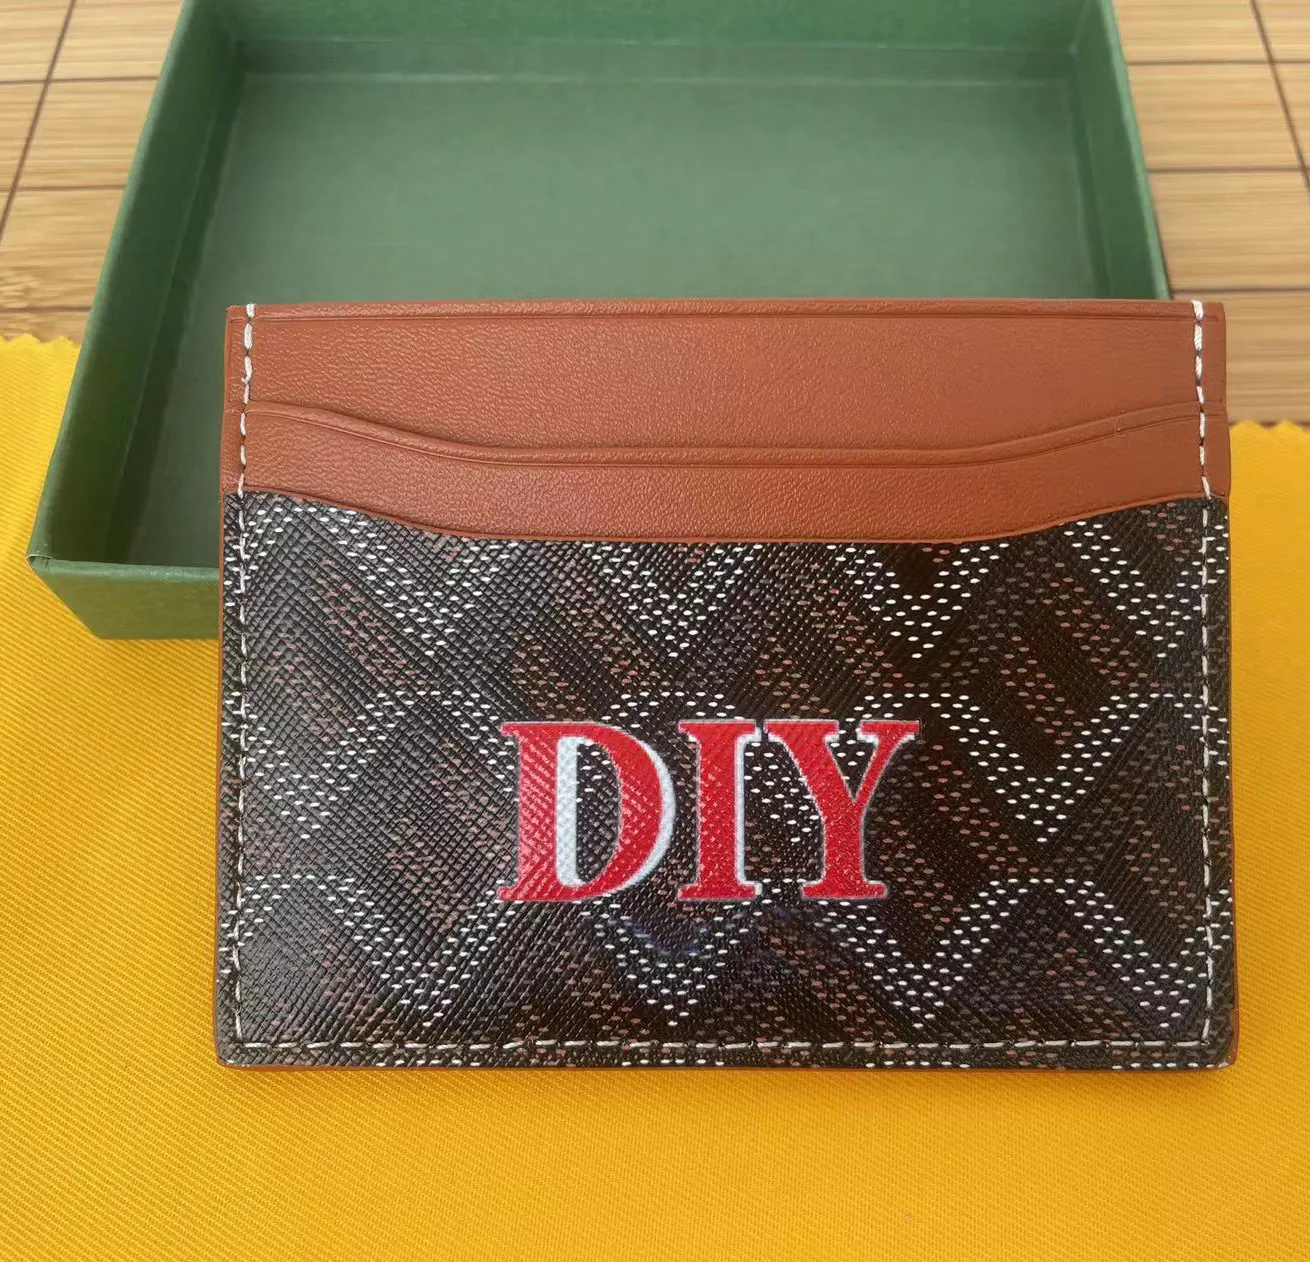 Card Holders Women MEN bag Clutch Real leather wallet slot pocket DIY Do It Yourself handmade Customized personalized customizing 3075